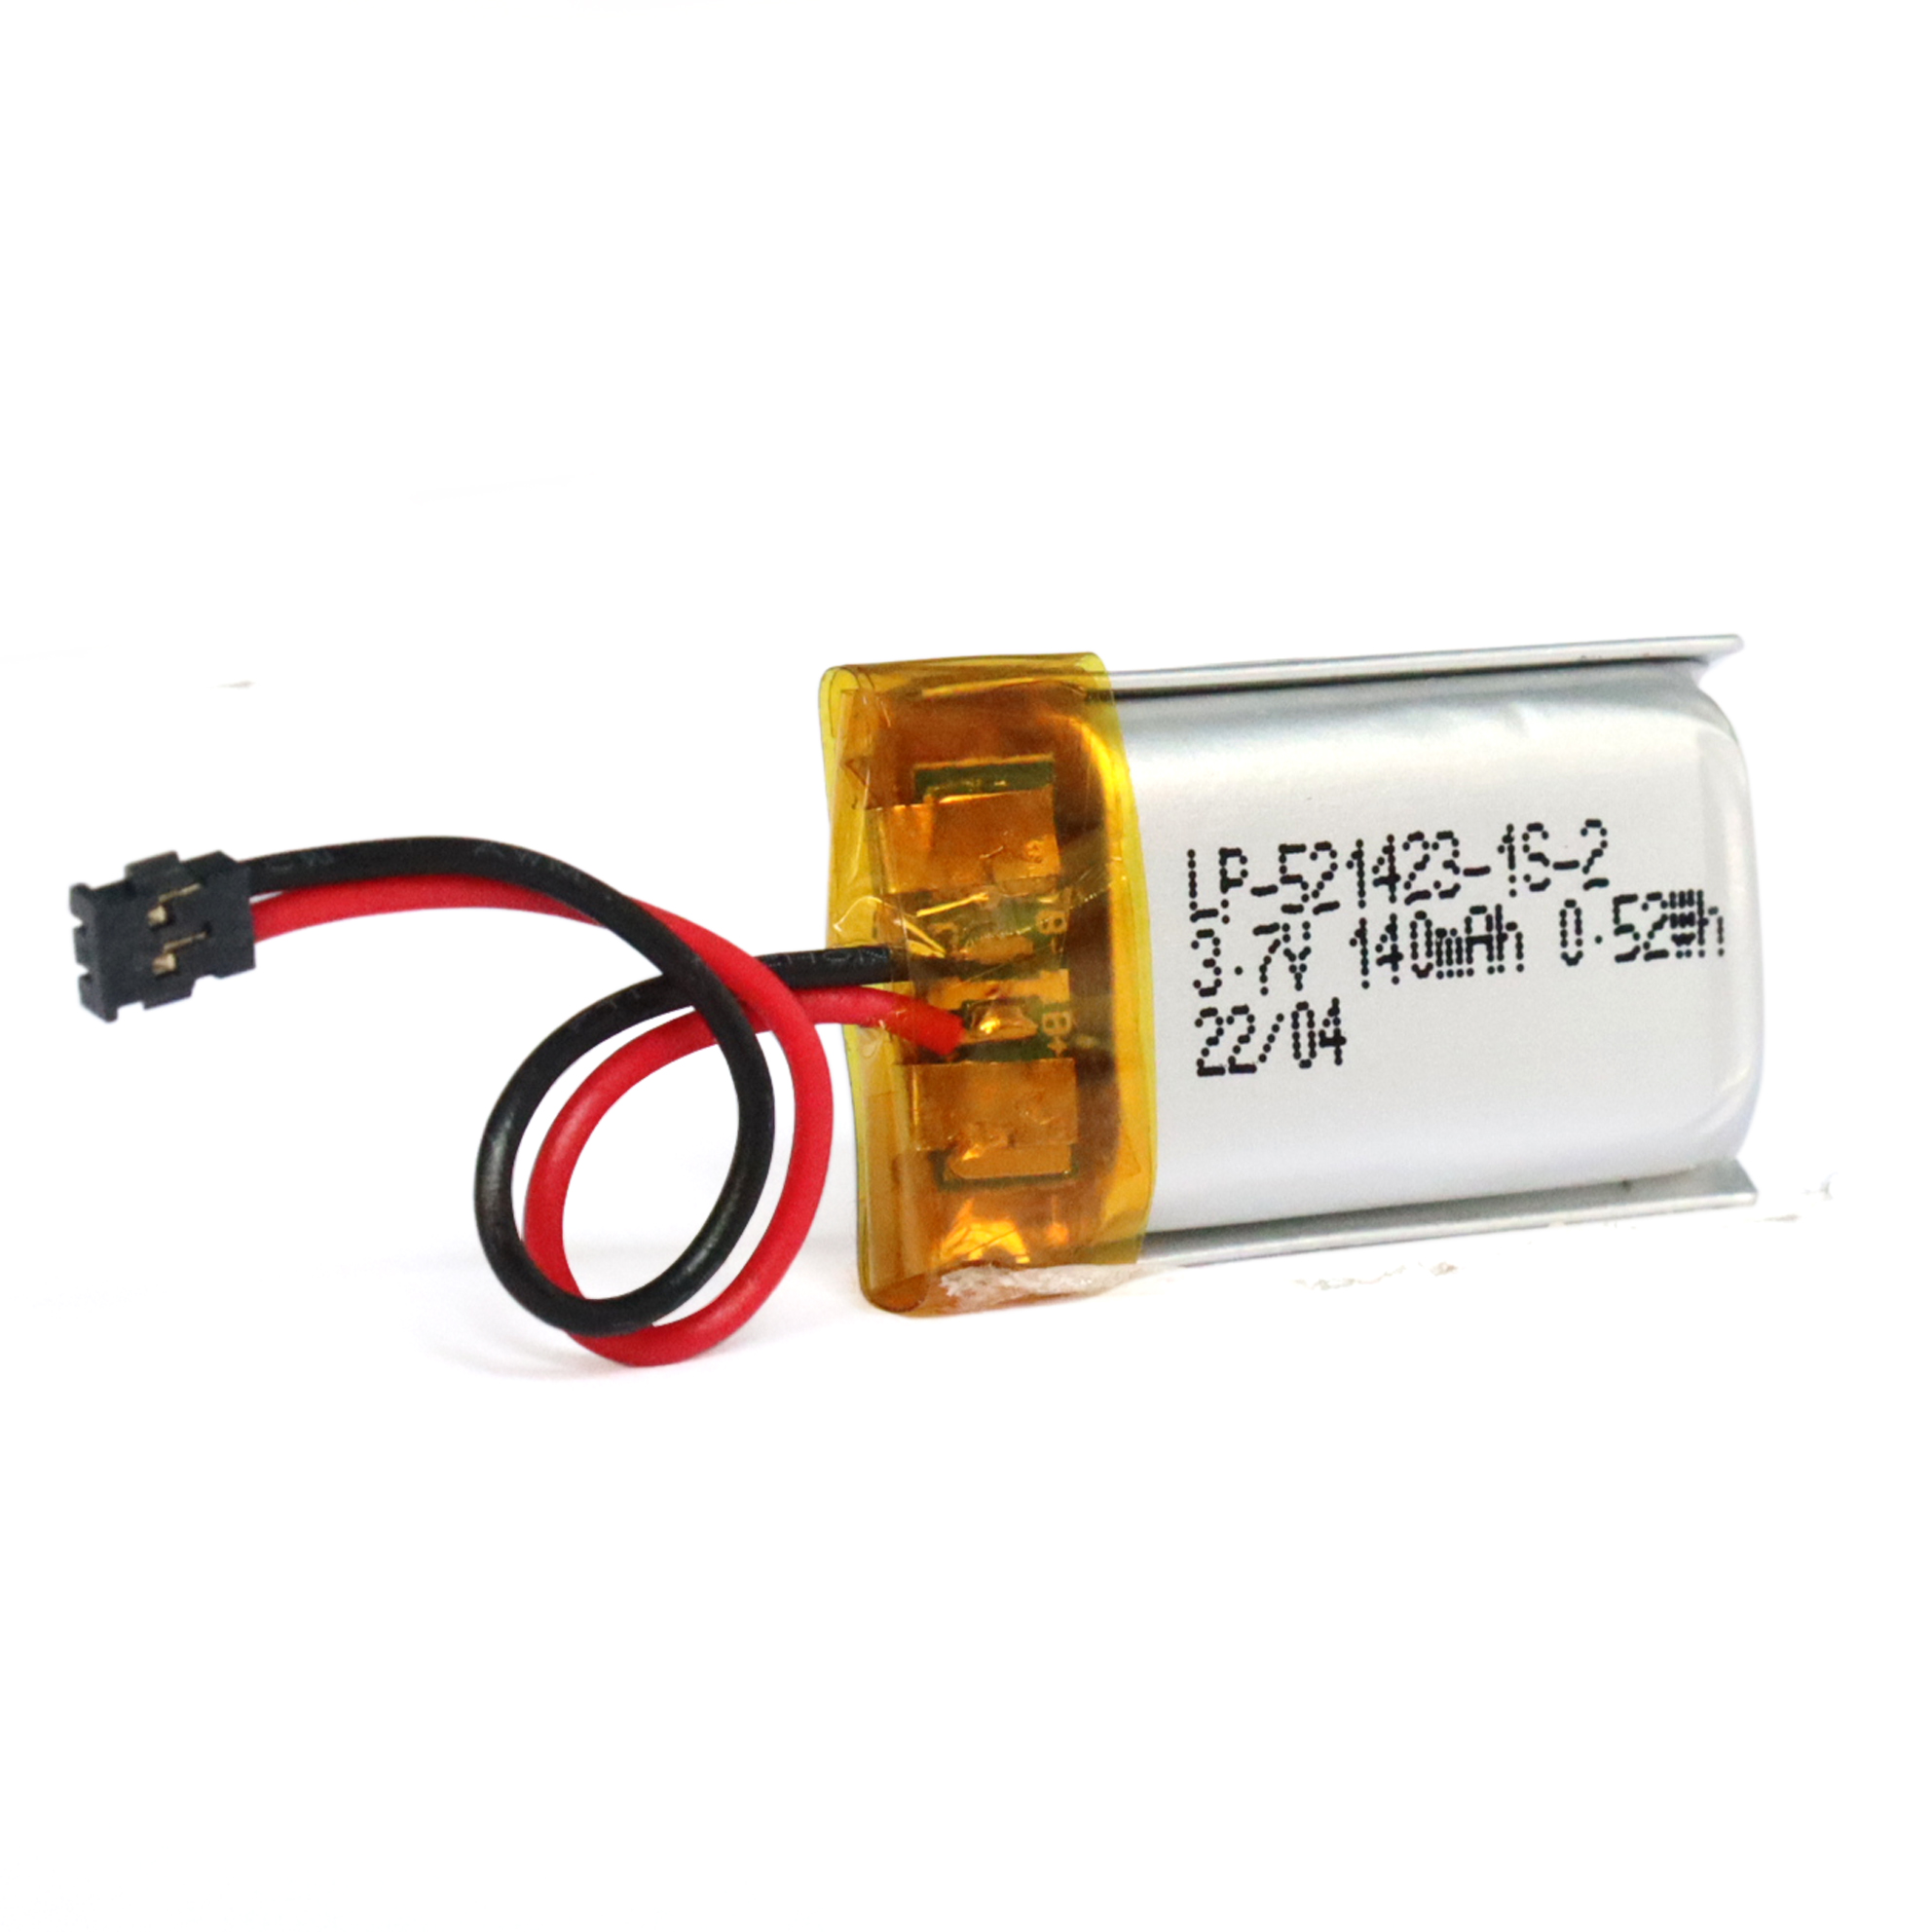 Lithium Polymer Battery 3.7V 200mAh for Bluetooth Device 